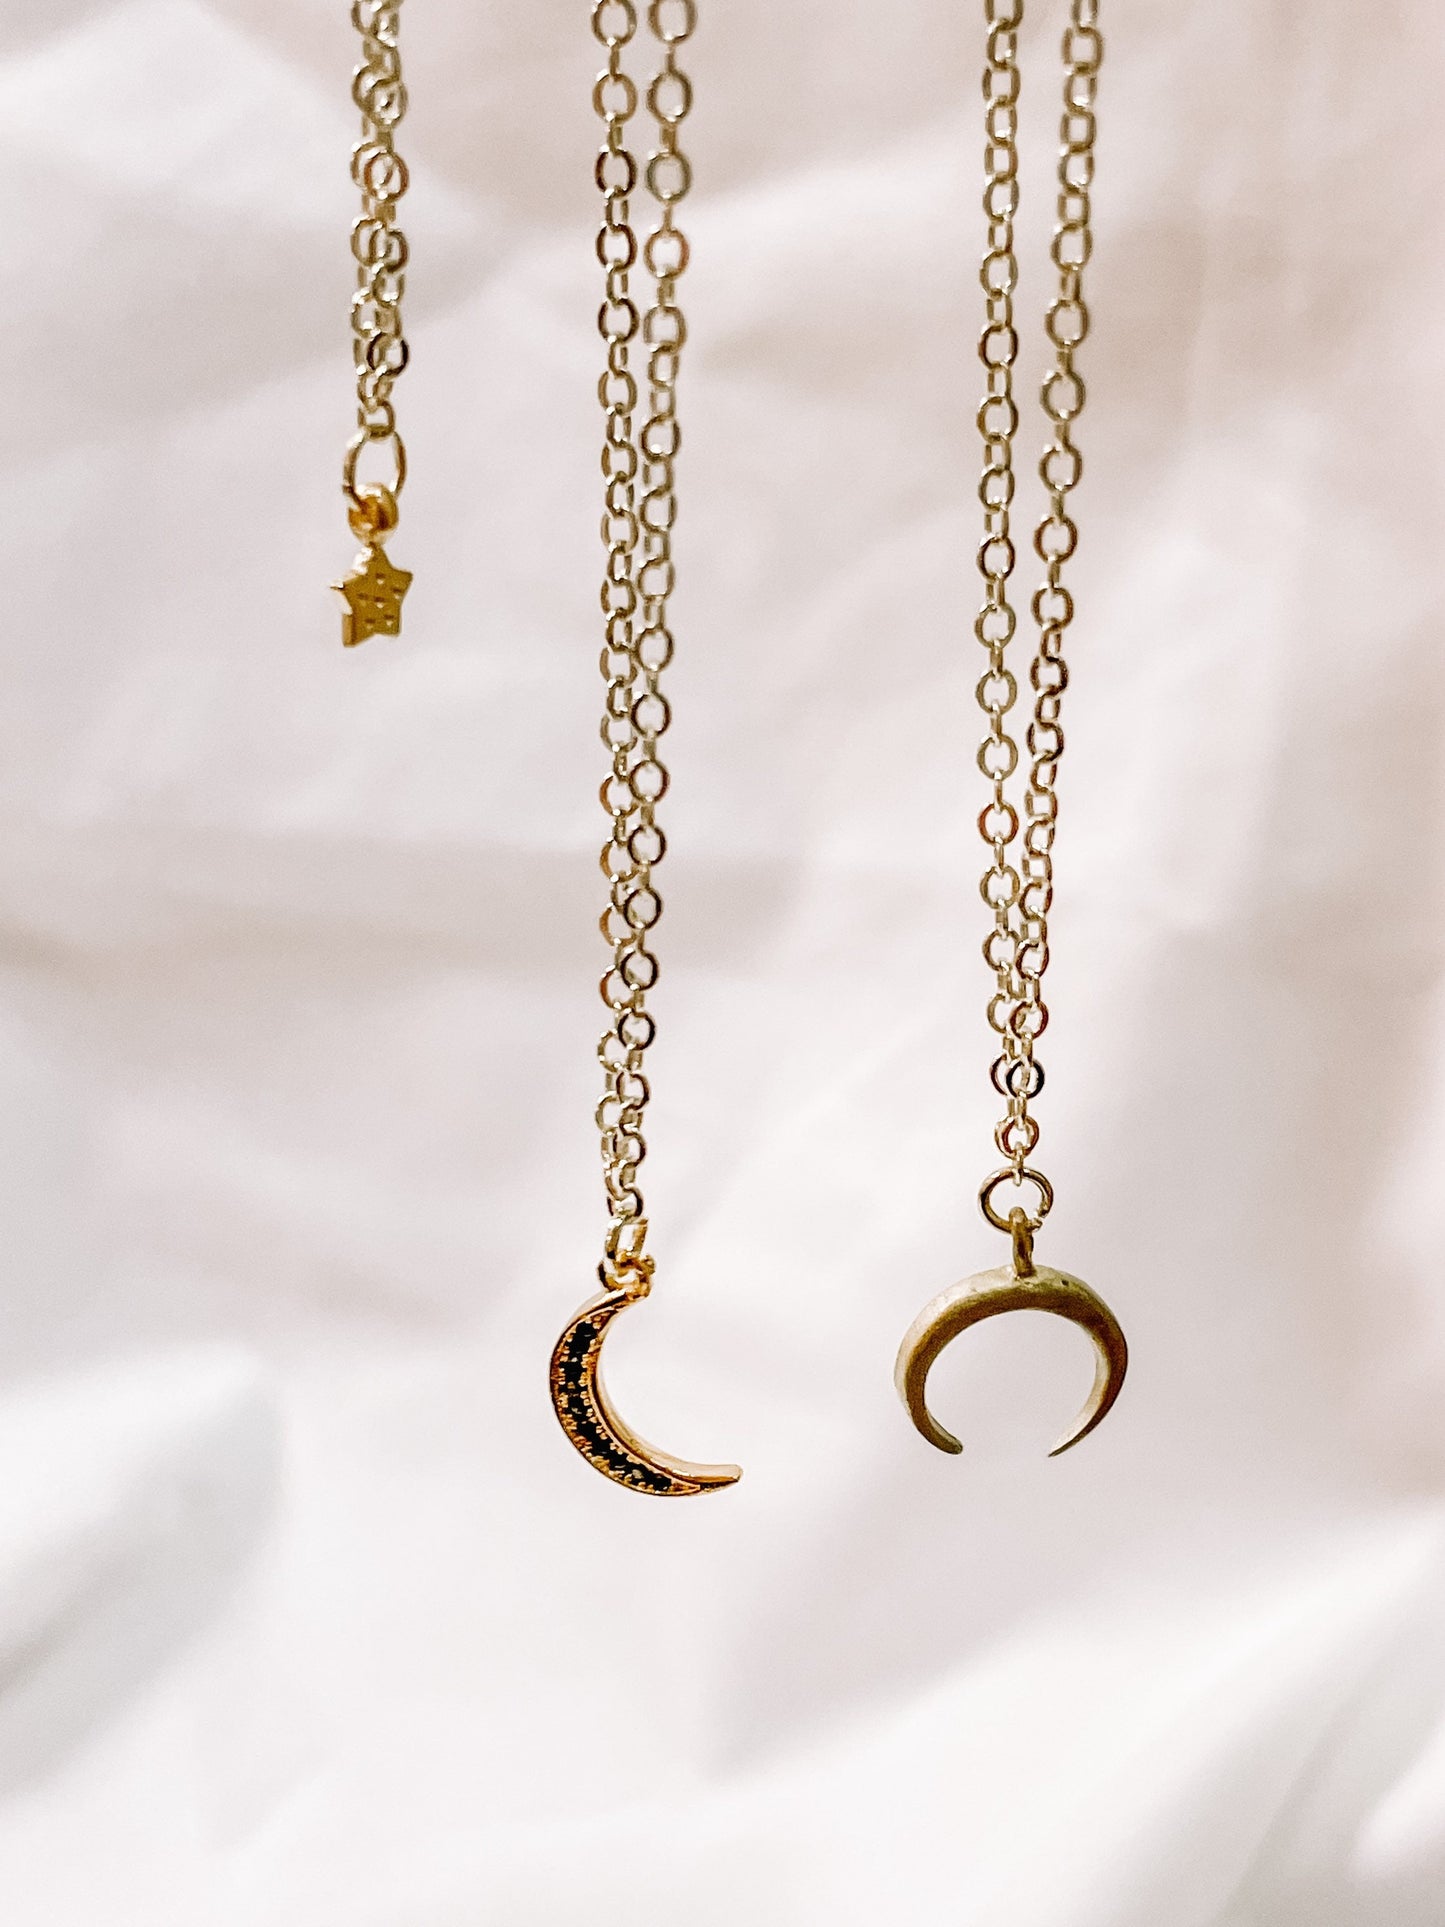 Studded moon charm necklace